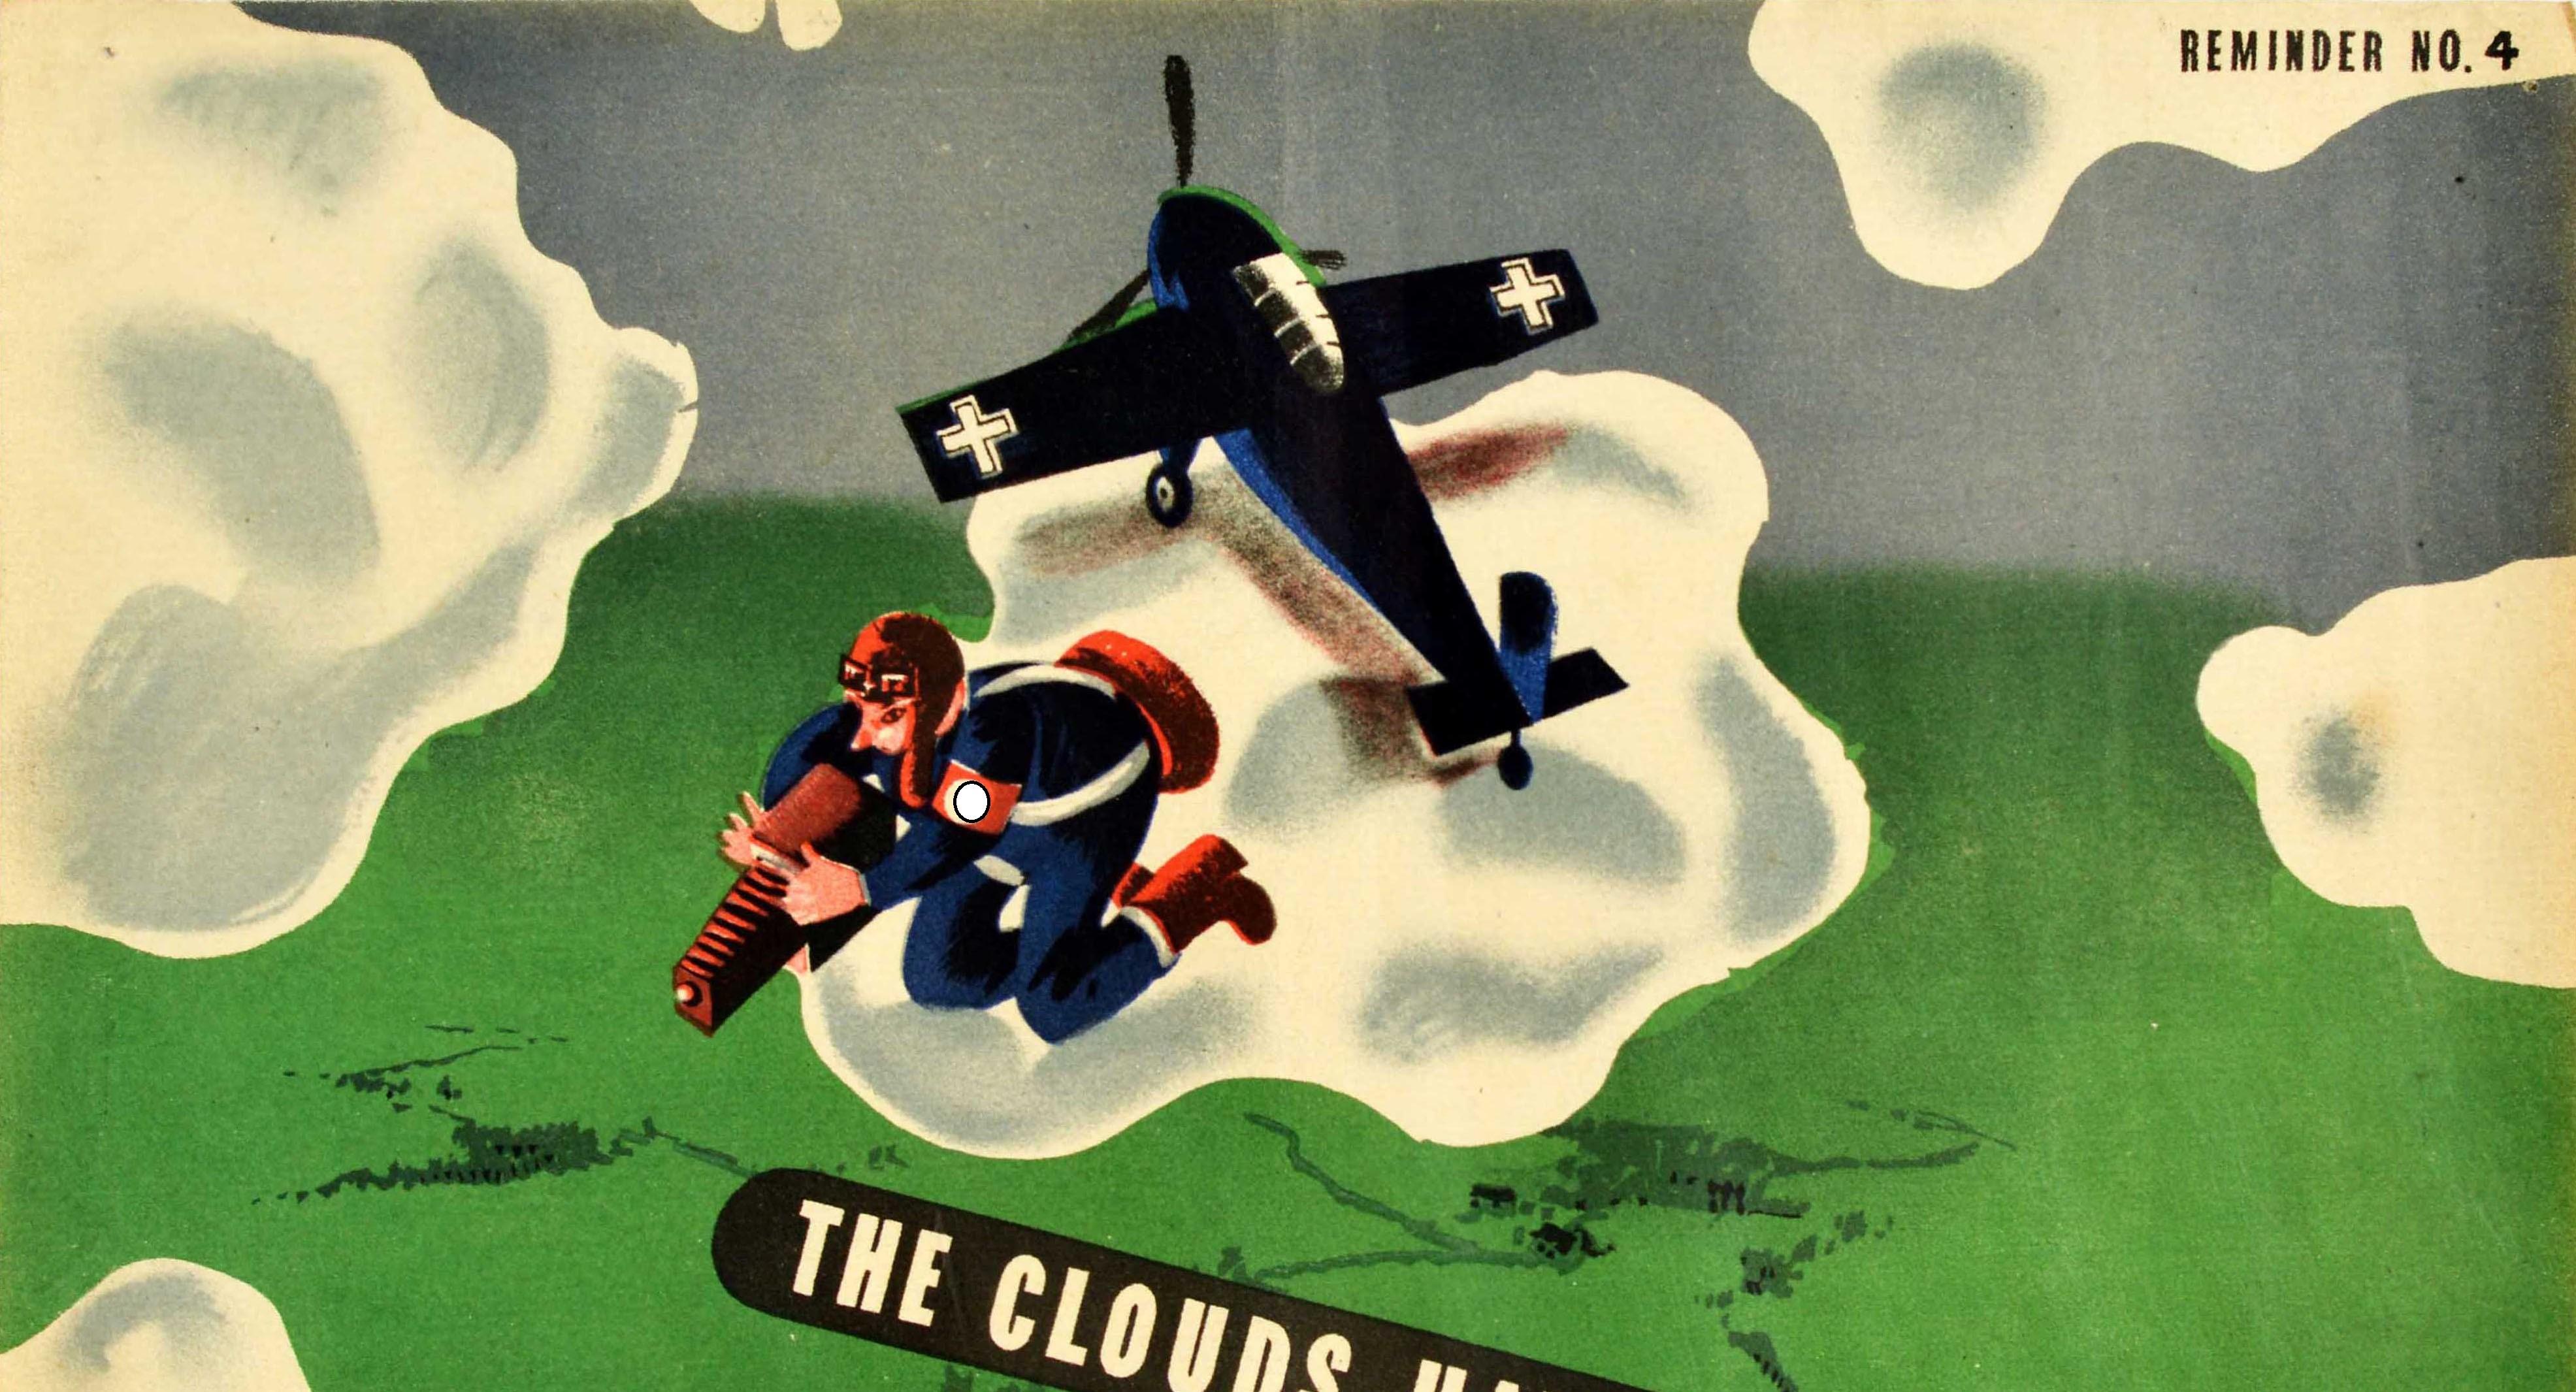 Original vintage World War Two poster - The Clouds Have Eyes - featuring a German Nazi pilot on a reconnaissance spy mission kneeling next to his plane on a cloud to take photos of the land below, the reminder warning text in bold white lettering on